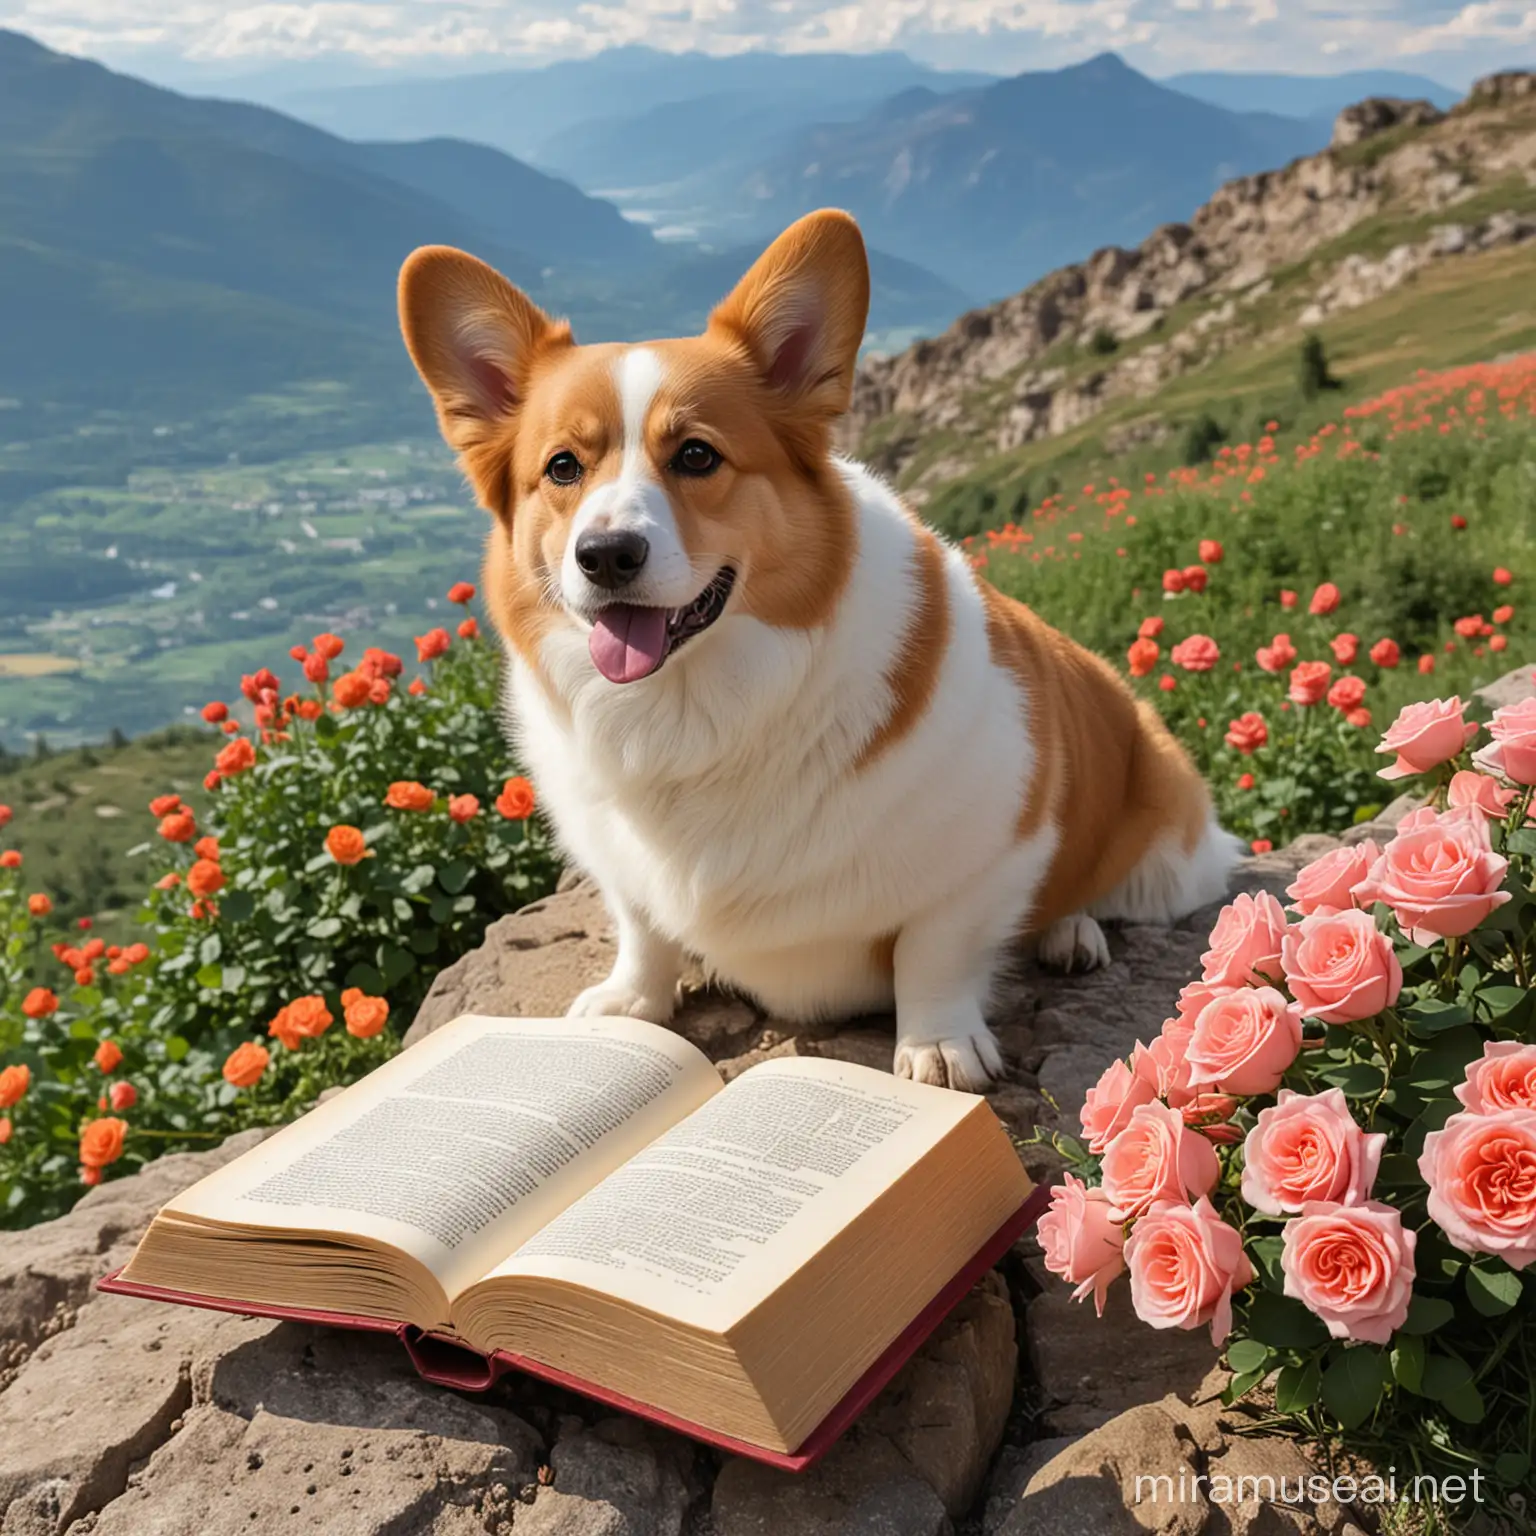 the big dog corgi. He sits on a mountain, Dog is reading a book, mountain full of roses